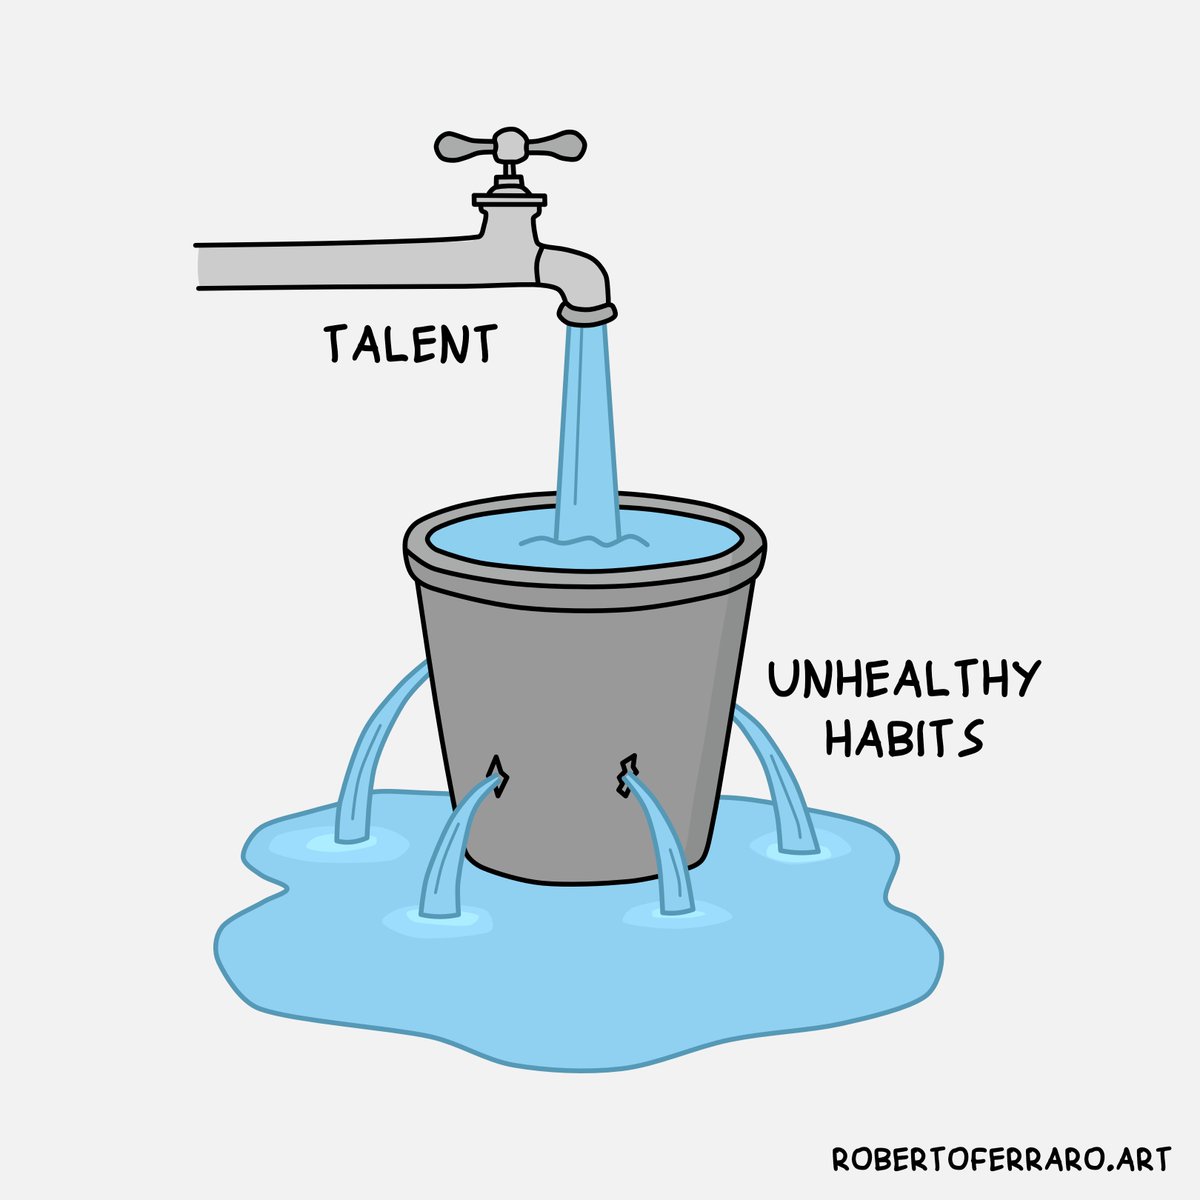 Talent is a leaky bucket without good habits to hold it.